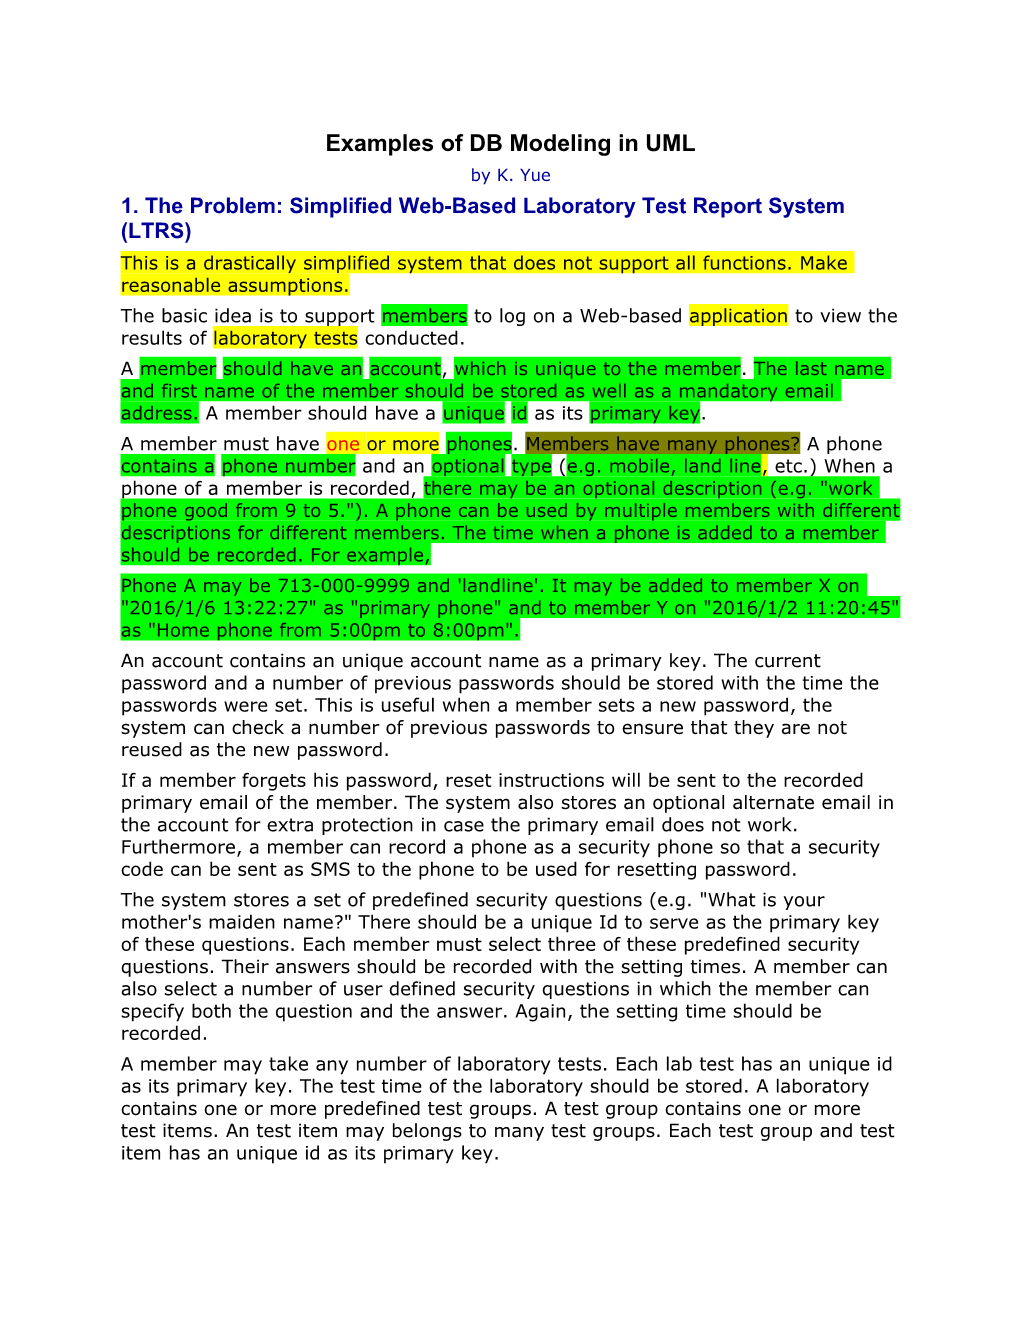 1. the Problem: Simplified Web-Based Laboratory Test Report System (LTRS)